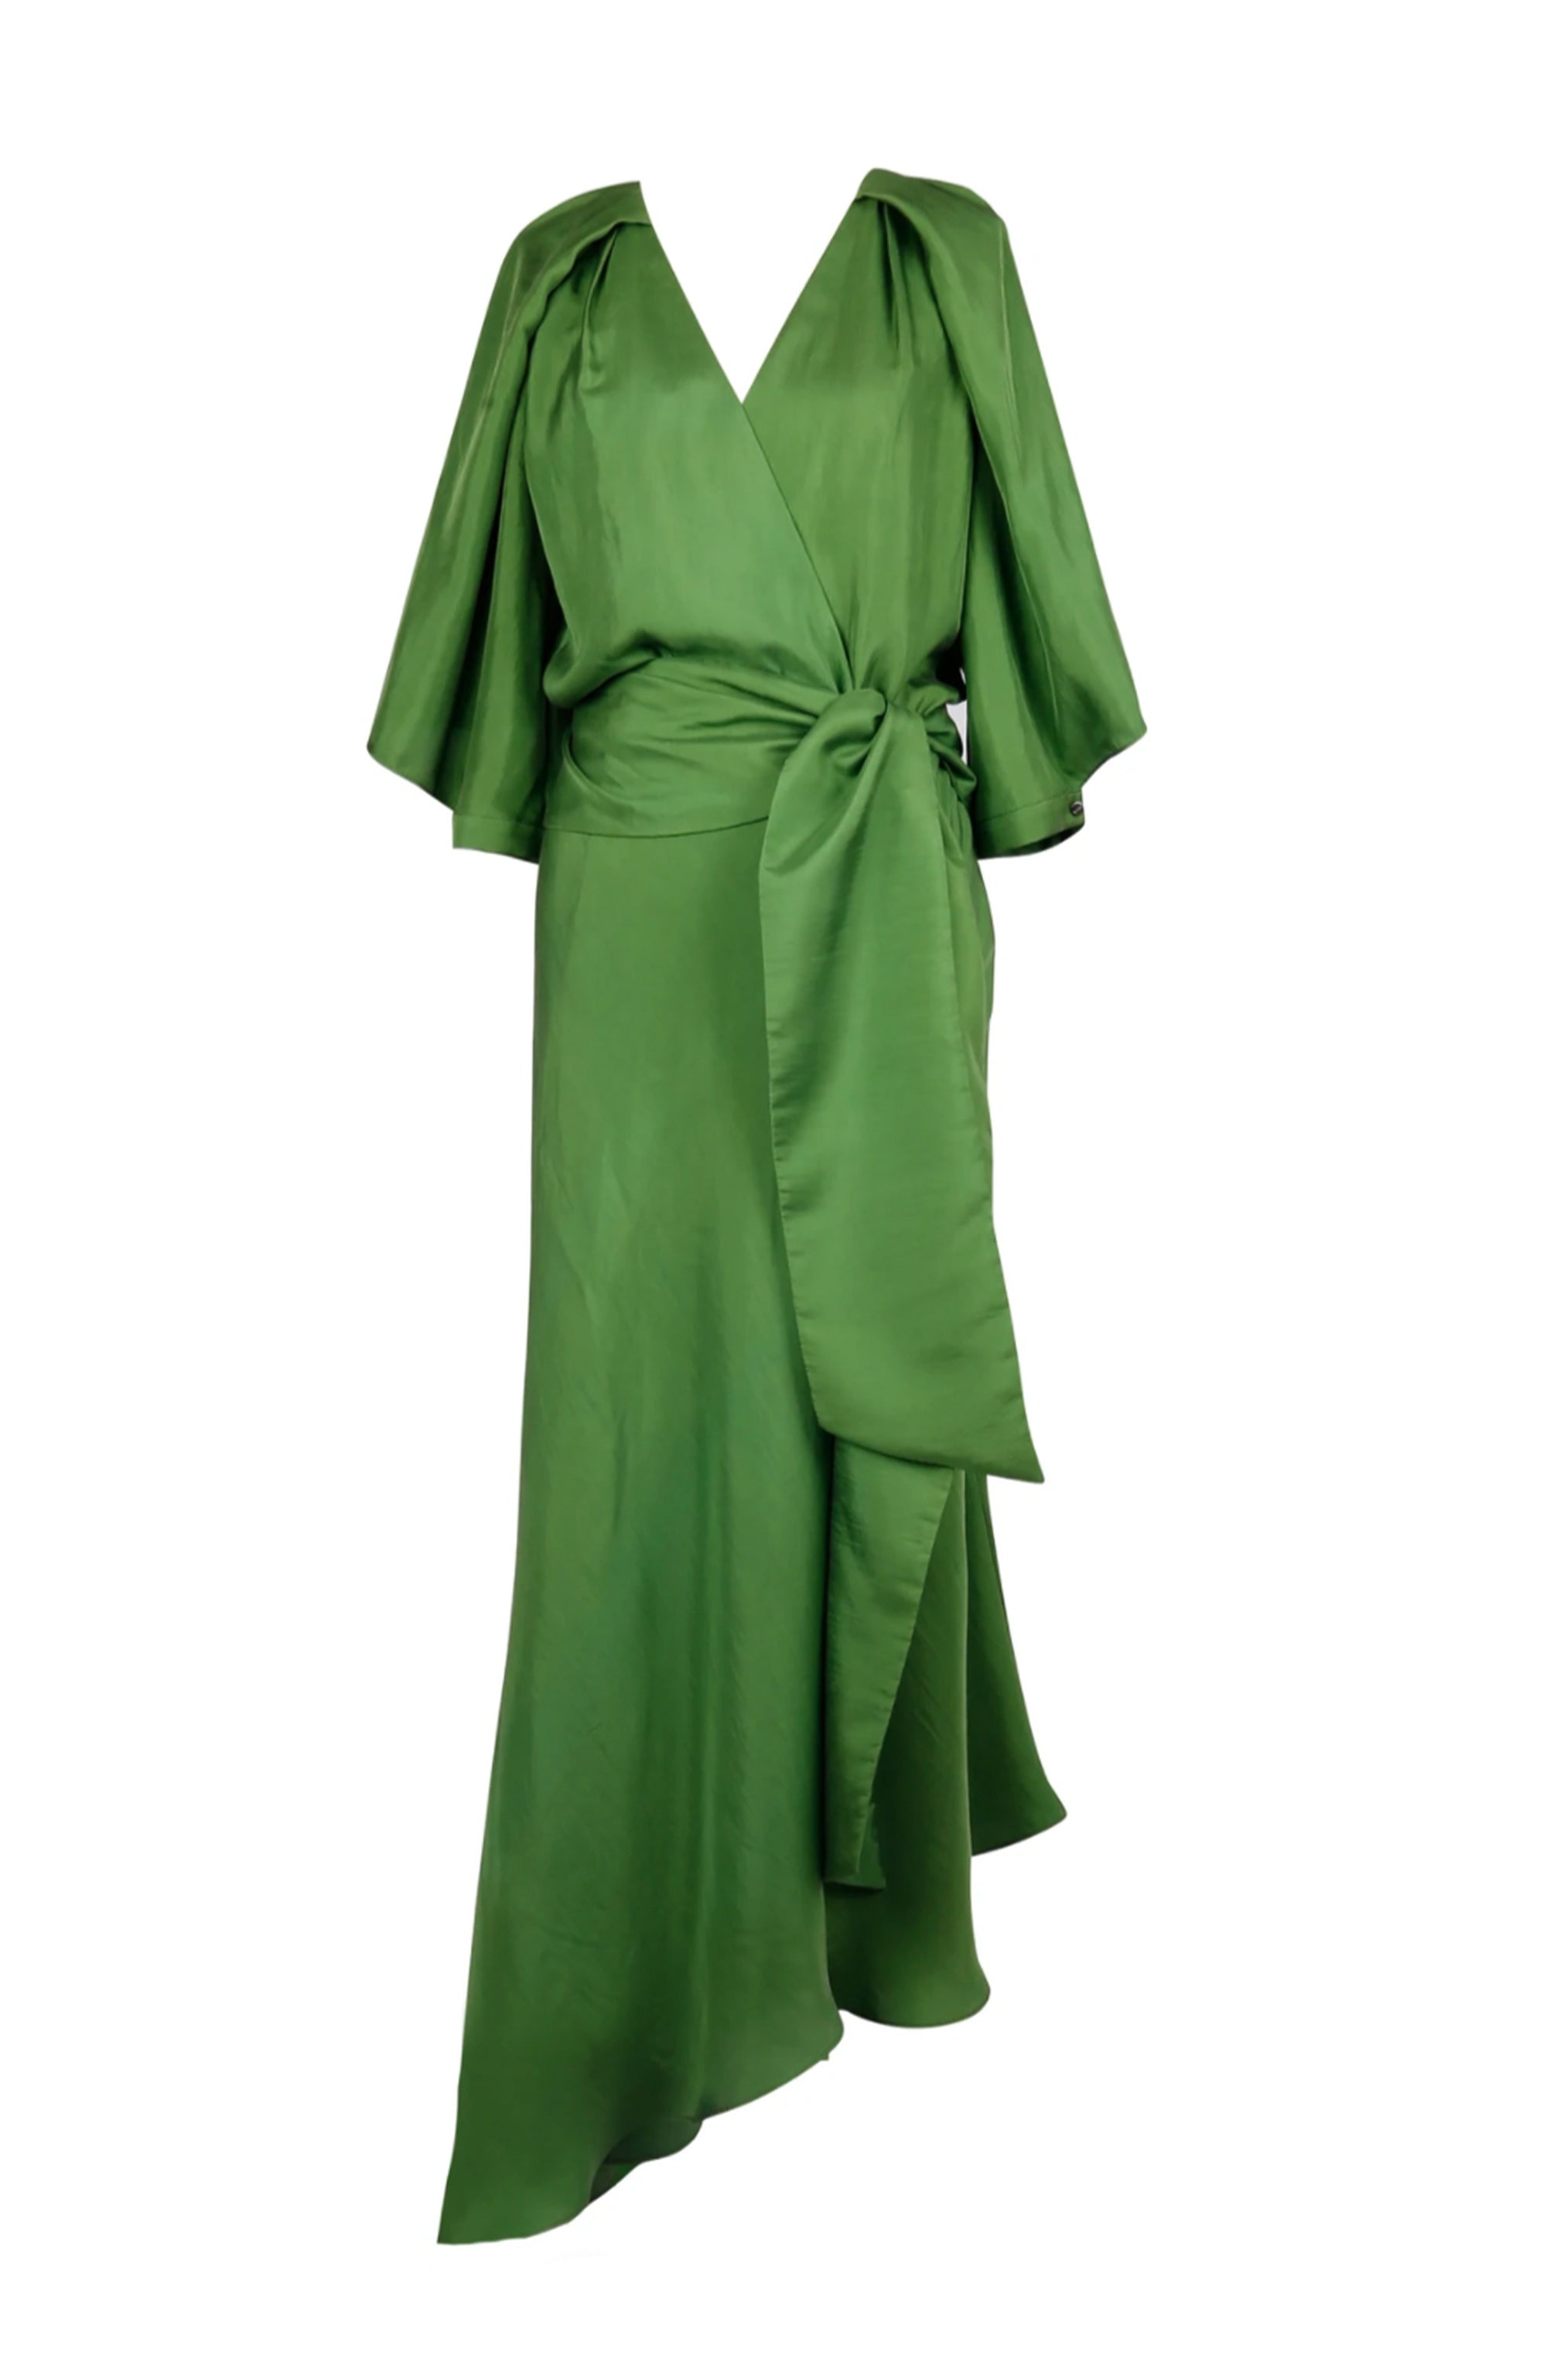 Easel Wrap Dress by Ginger & Smart for Hire | High St. Hire